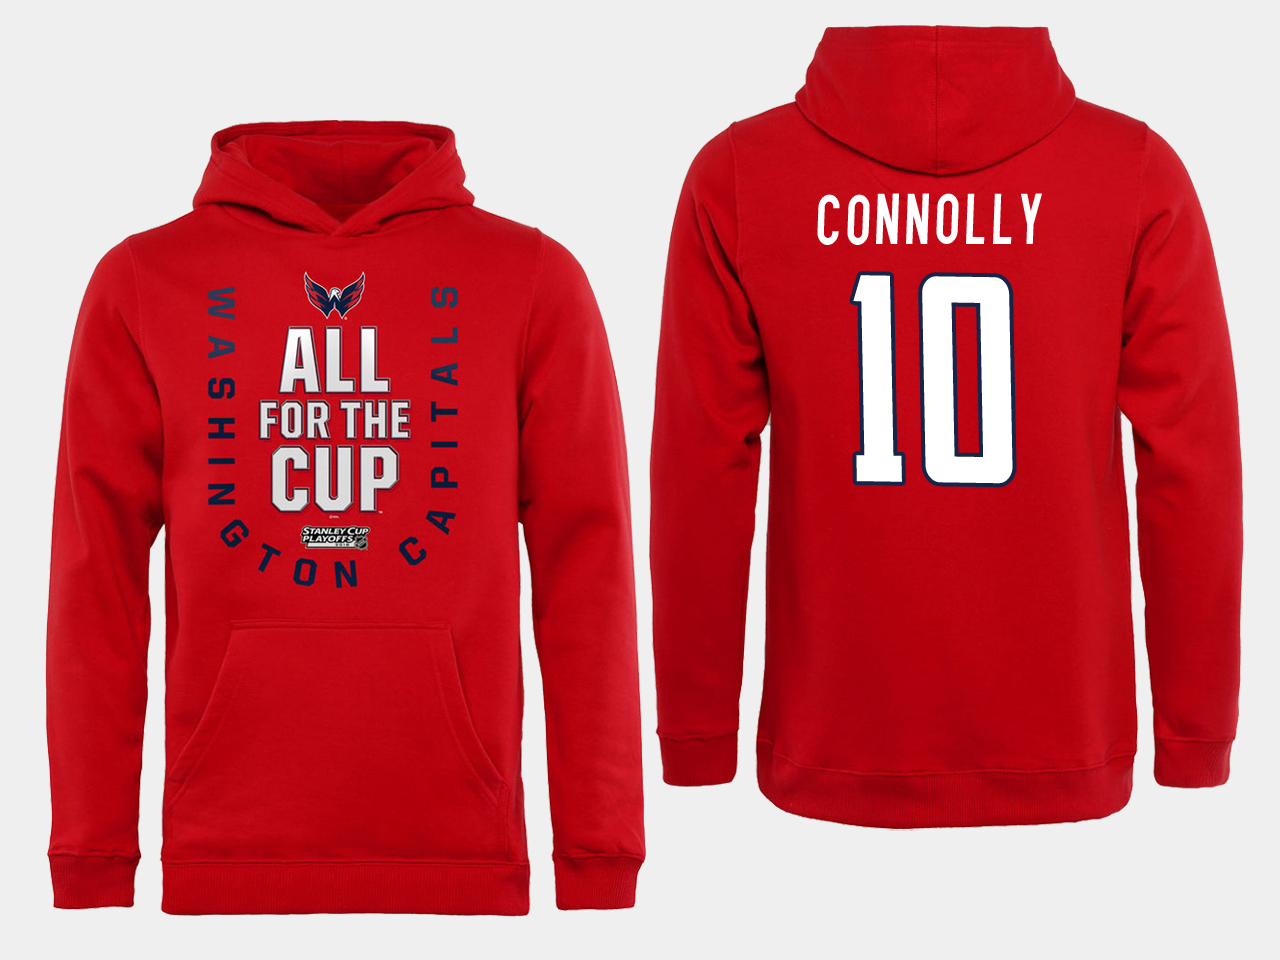 Men NHL Washington Capitals #10 Connolly Red All for the Cup Hoodie->washington capitals->NHL Jersey